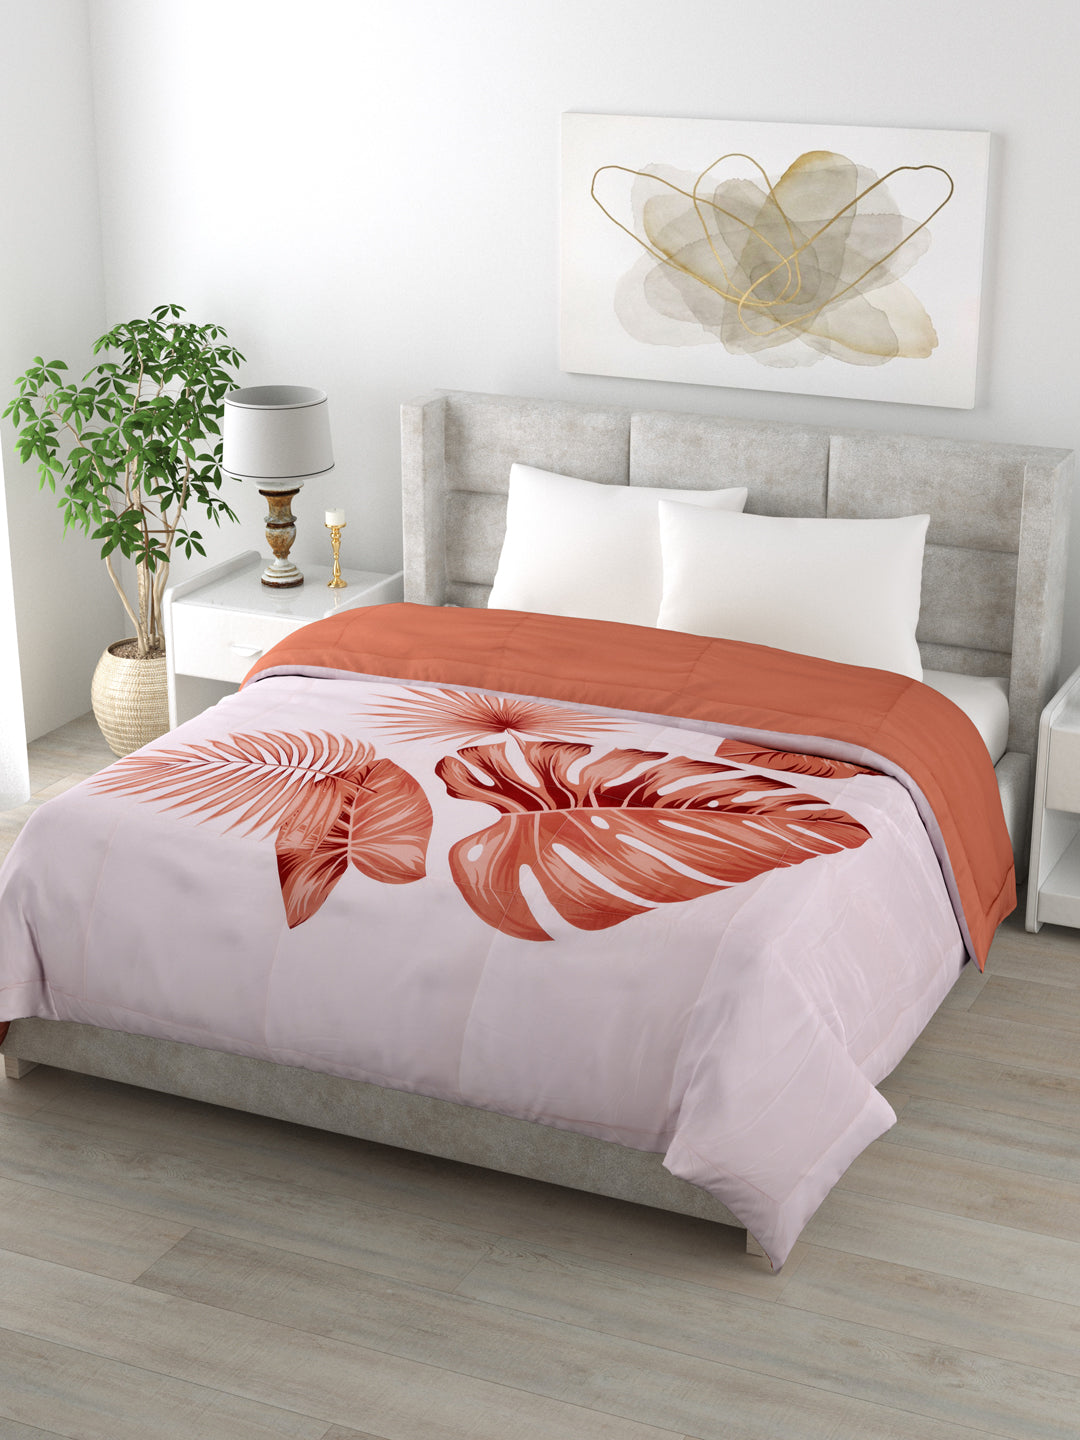 Reversible King Size Comforter 220 GSM; 90x100 Inches; Orange Leaves On Pink